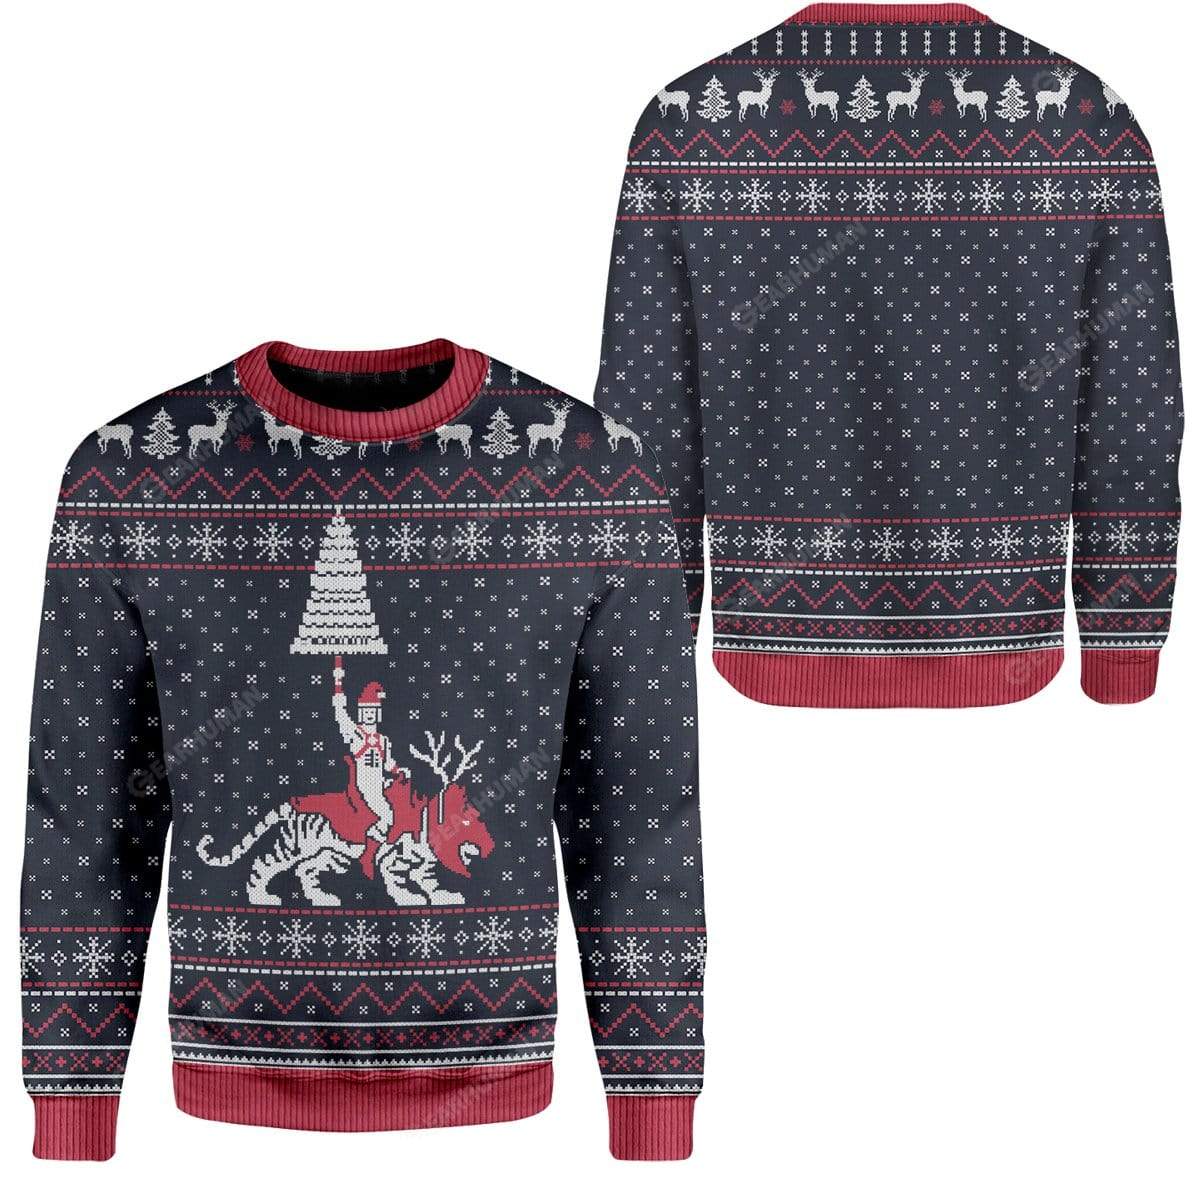 Ugly The Man Custom Sweater Apparel HD-TT18111909 Ugly Christmas Sweater 